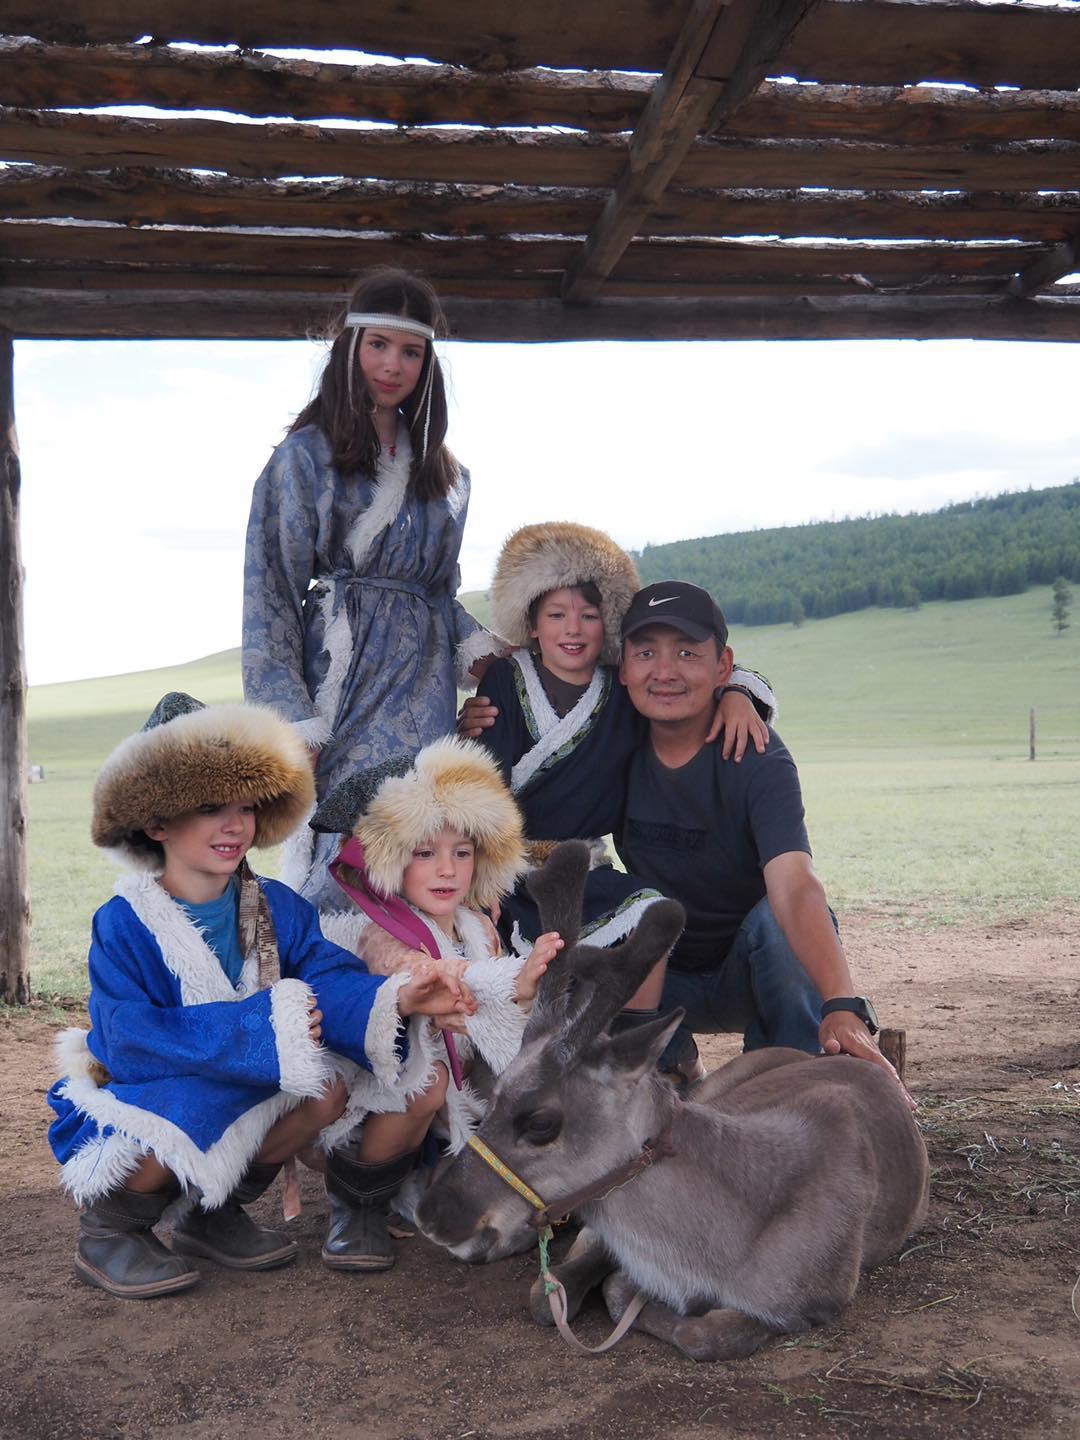 The family interact with locals in Mongolia. (Courtesy of Edith Lemay)